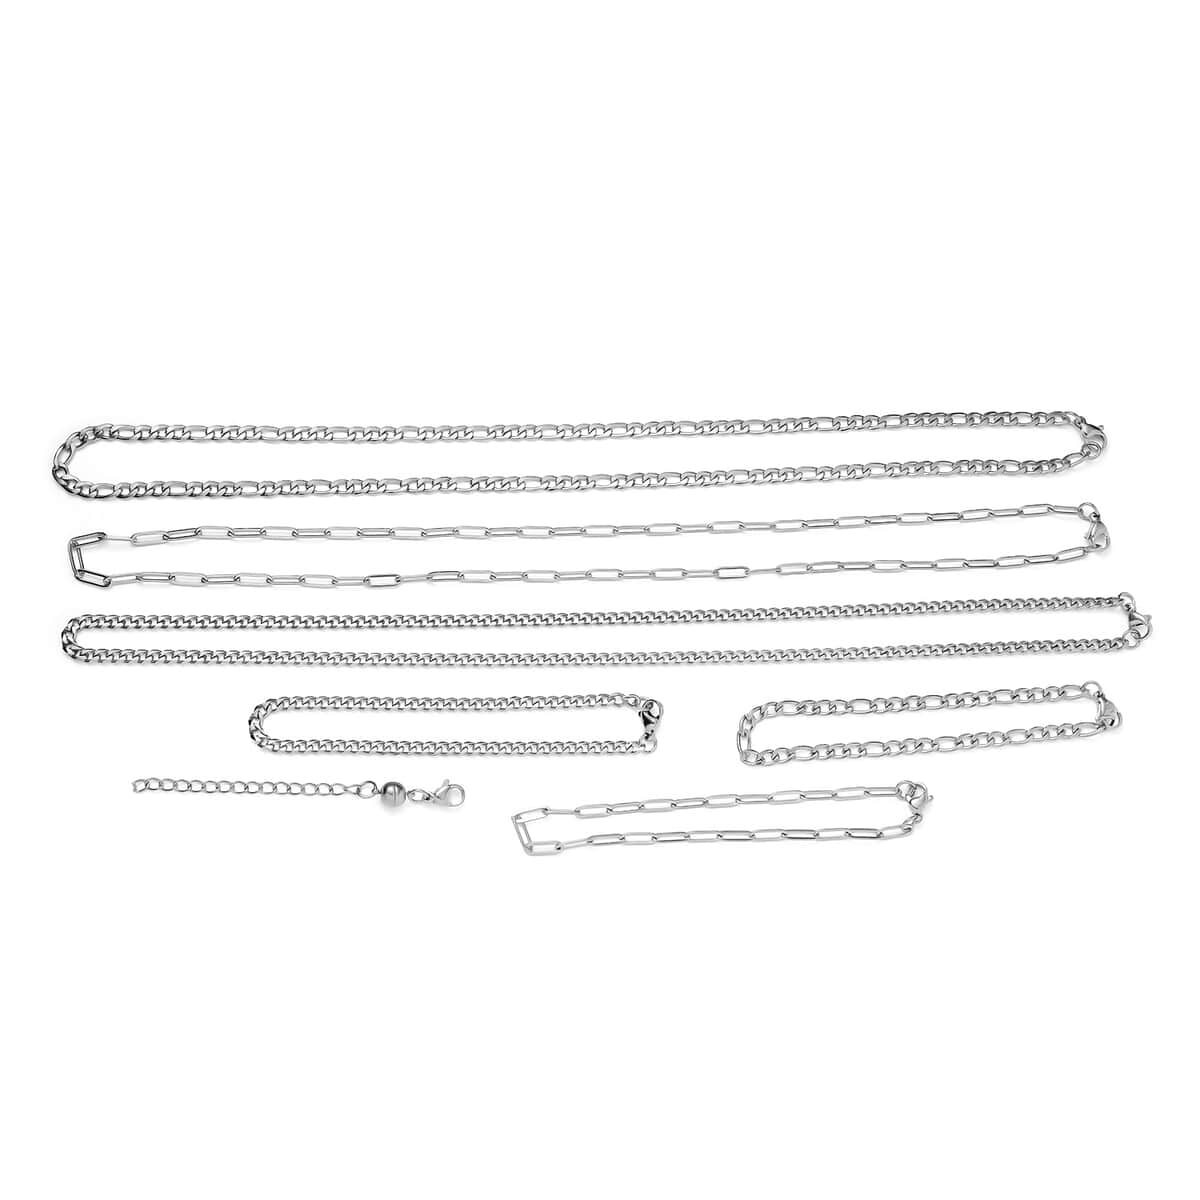 Ankur Treasure Chest Set of 7, Figaro, Paper Clip and Cable Chain 3pcs Necklace 20 Inches, 3pcs Bracelet (7.5-8.0In) and 1pc Magnetic Lock in Stainless Steel image number 0